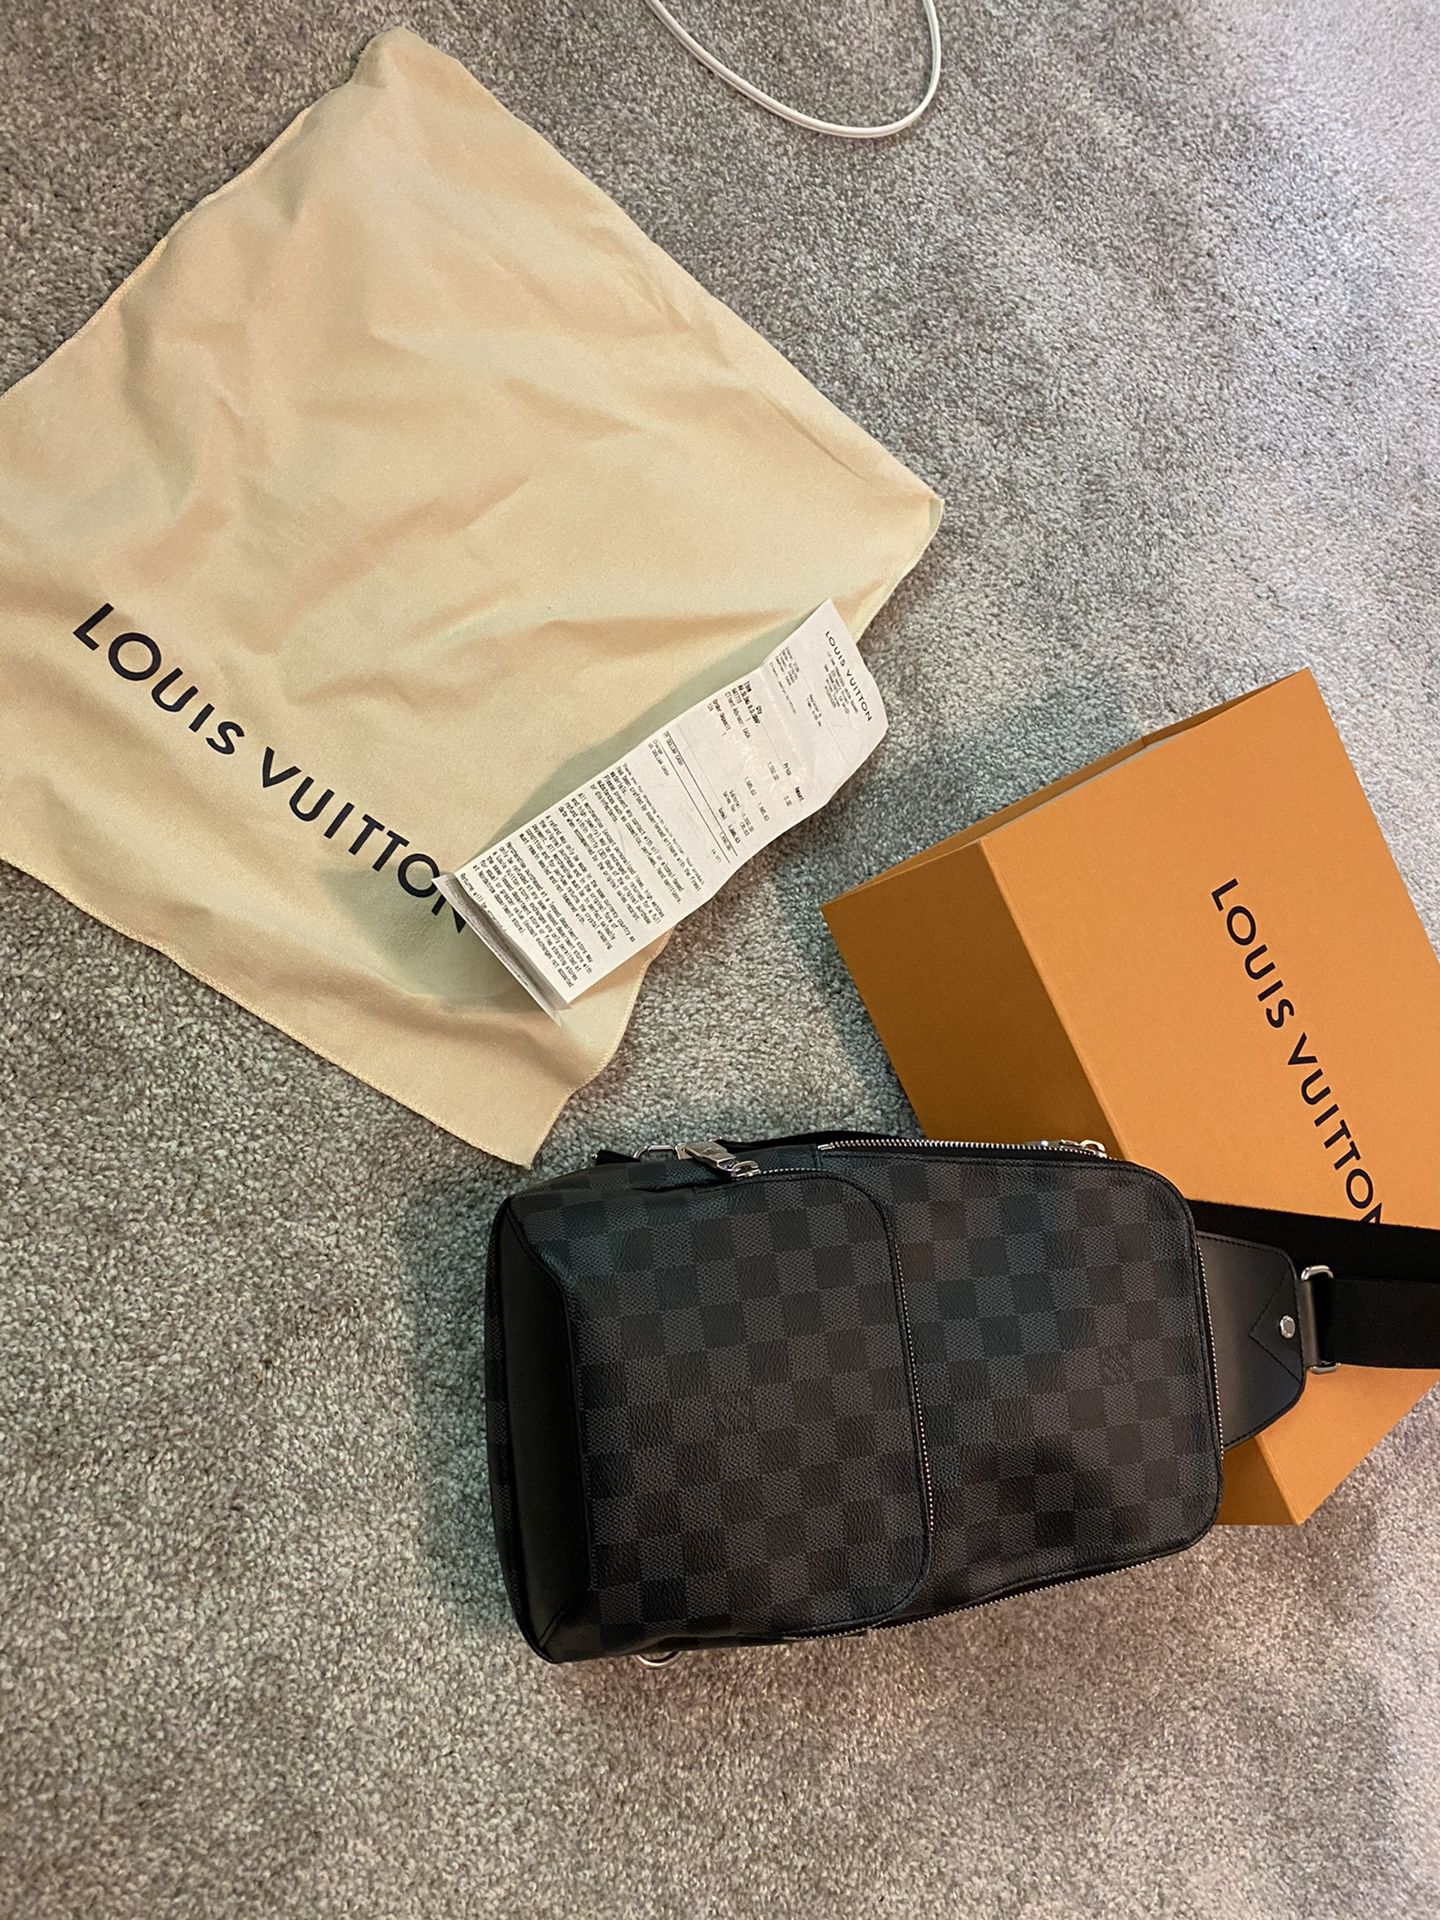 LOUIS VUITTON AVENUE SLING BAG BRAND NEW WITH RECEIPTS . Purchased At SF LV STORE